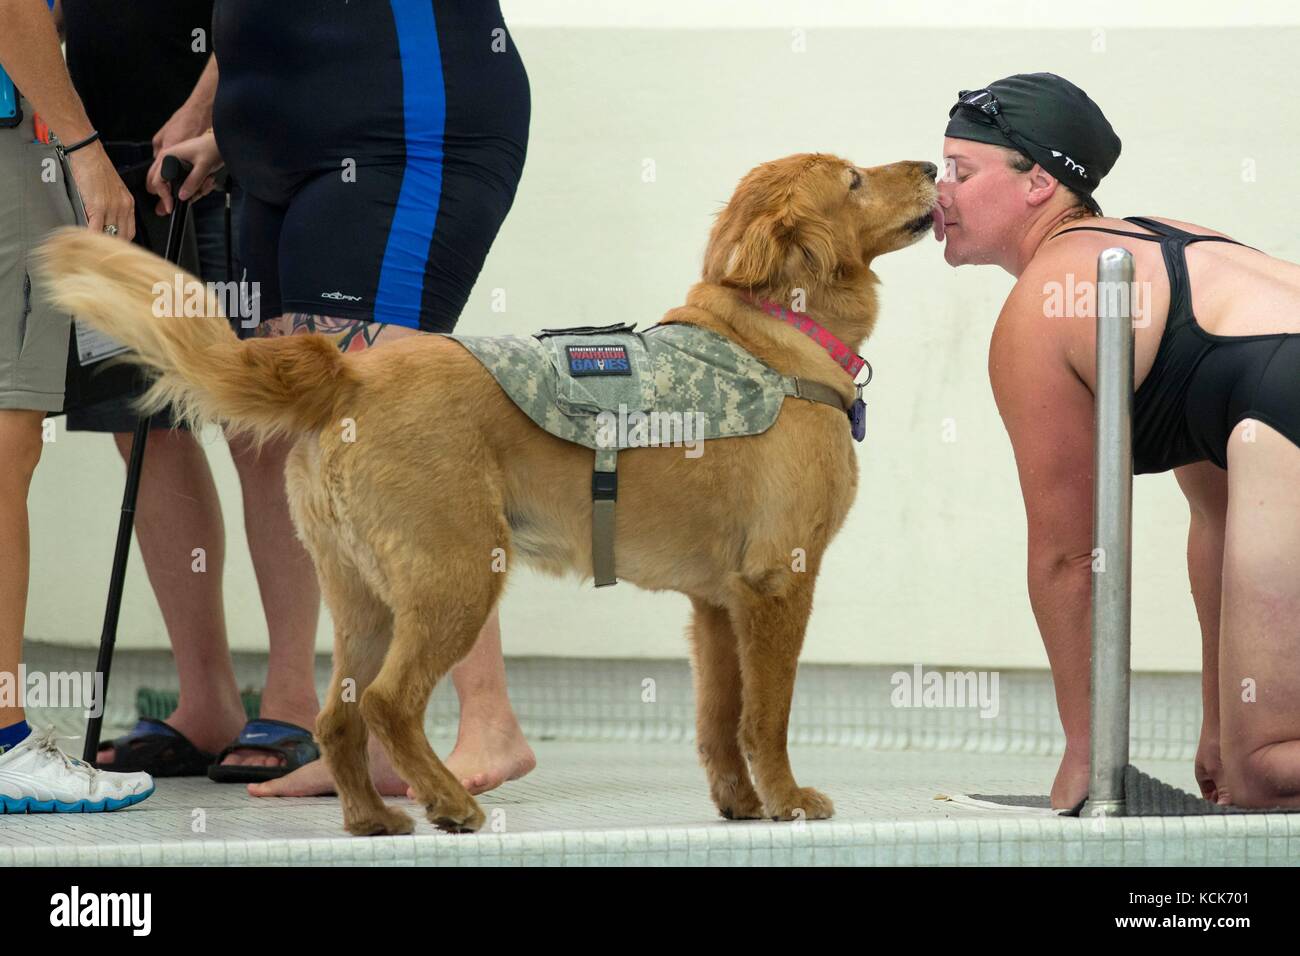 U.S. Army veteran Christina Gardner gets a kiss from her military service dog Moxie after competing in a swimming race during the Department of Defense Warrior Games at the University of Illinois July 8, 2017 in Chicago, Illinois. The DoD Warrior Games allow wounded, ill and injured soldiers and veterans to compete in Paralympic-style sports.  (photo by Roger L. Wollenberg  via Planetpix) Stock Photo